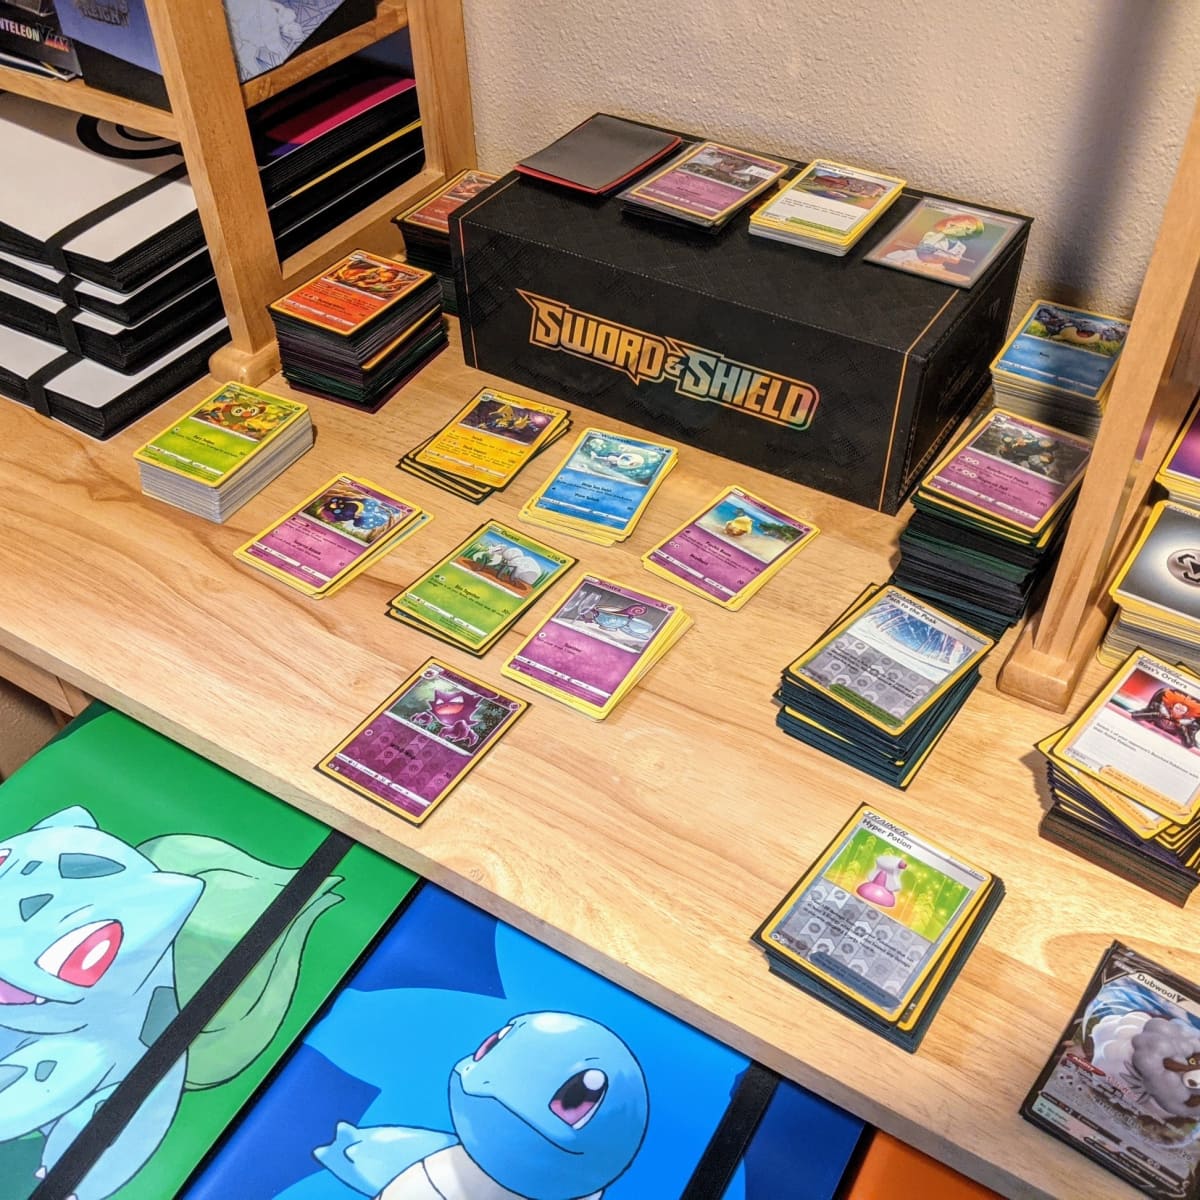 How to Convince My Parents to Buy Me Pokémon Cards - HubPages